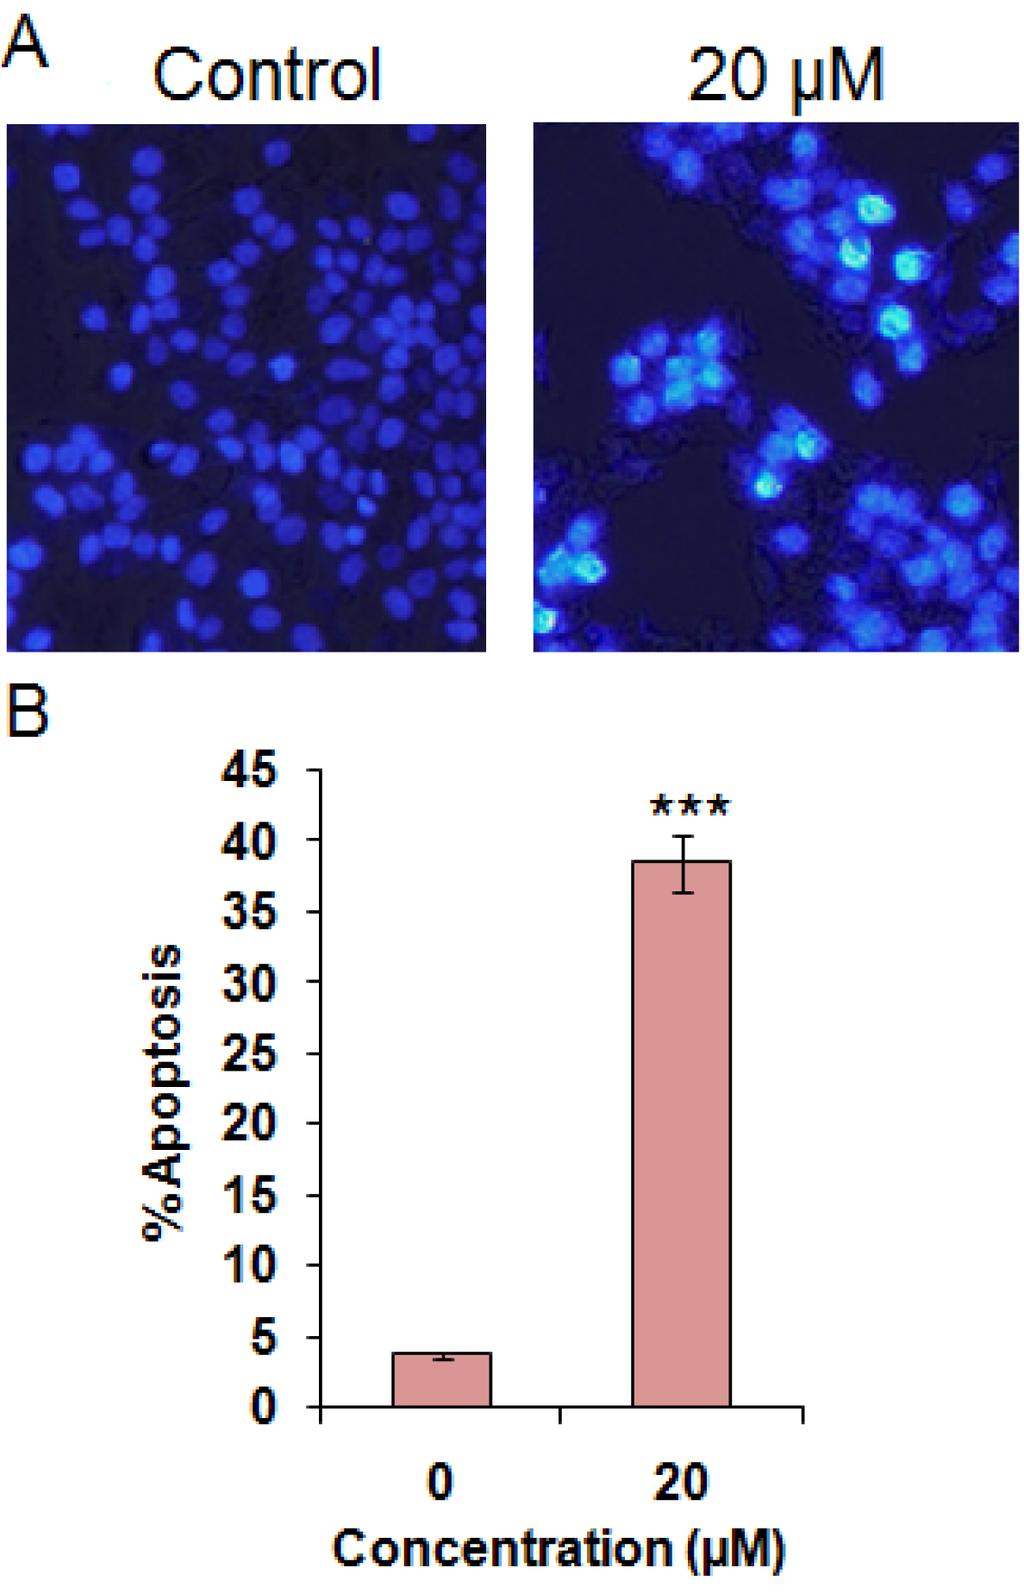 Induction of apoptosis in Colo-205 cells at IC50 concentrations of geranyl acetate as indicated by (A) DAPI staining and (B) quantification of % apoptotic cells.